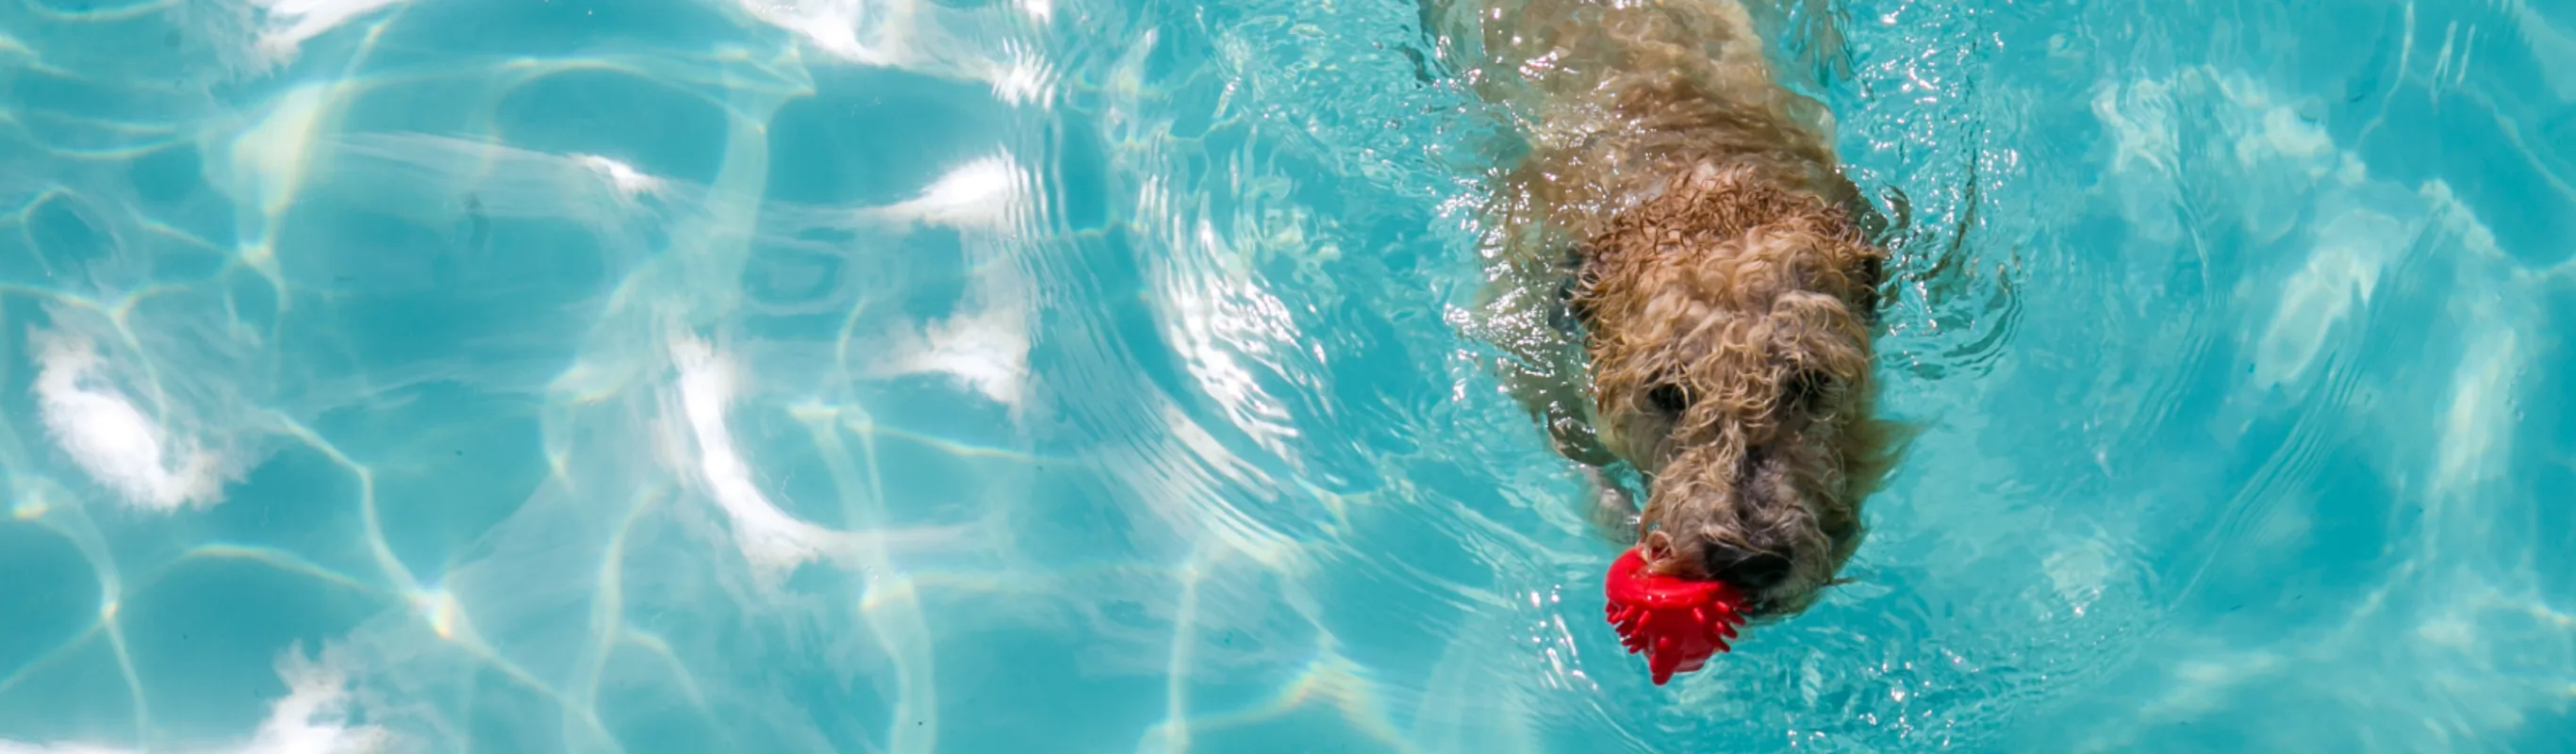 Dog Swimming in a pool with a red chew toy